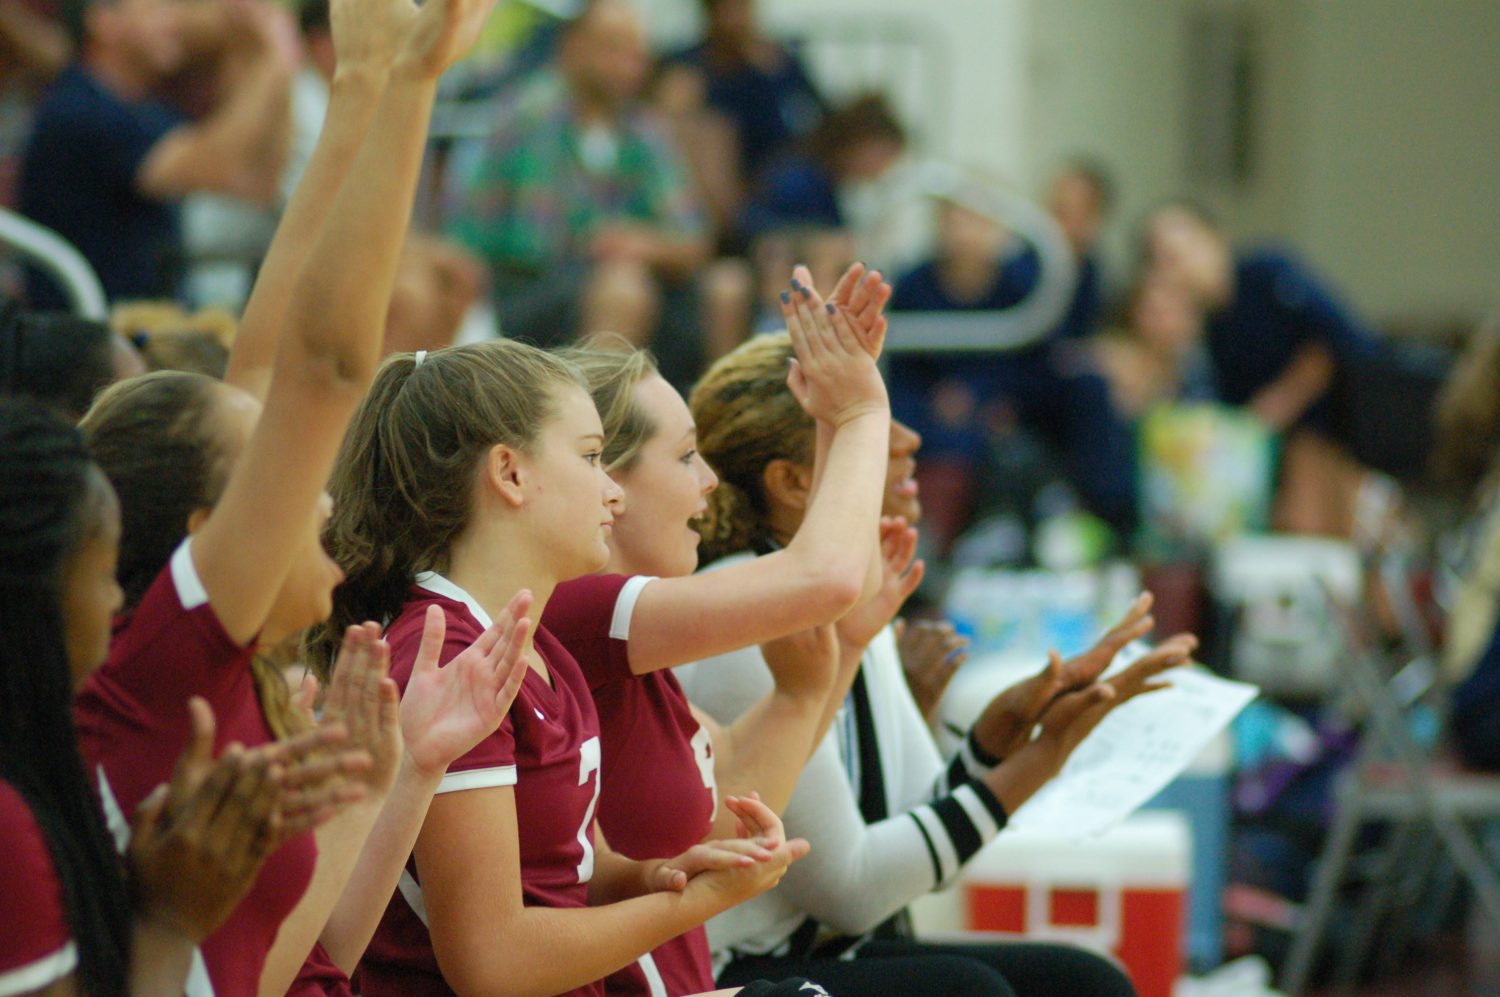 The junior varsity volleyball team cheers on their teammates during a match against Decatur High School.